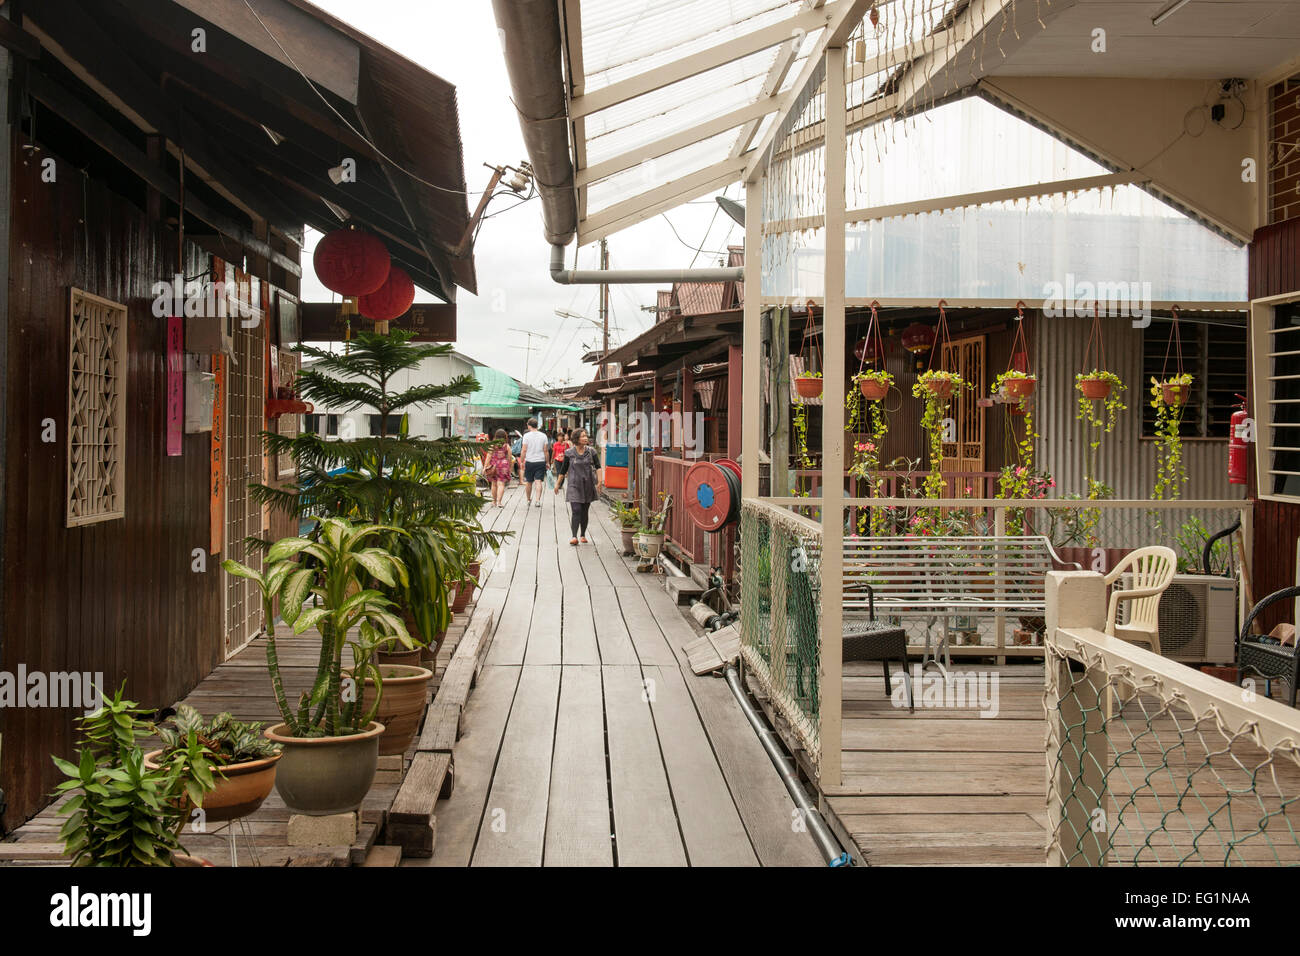 Chew Jetty (aka Seh Chew Keo), a historic waterfront settlement in George Town, Penang, Malaysia. Stock Photo